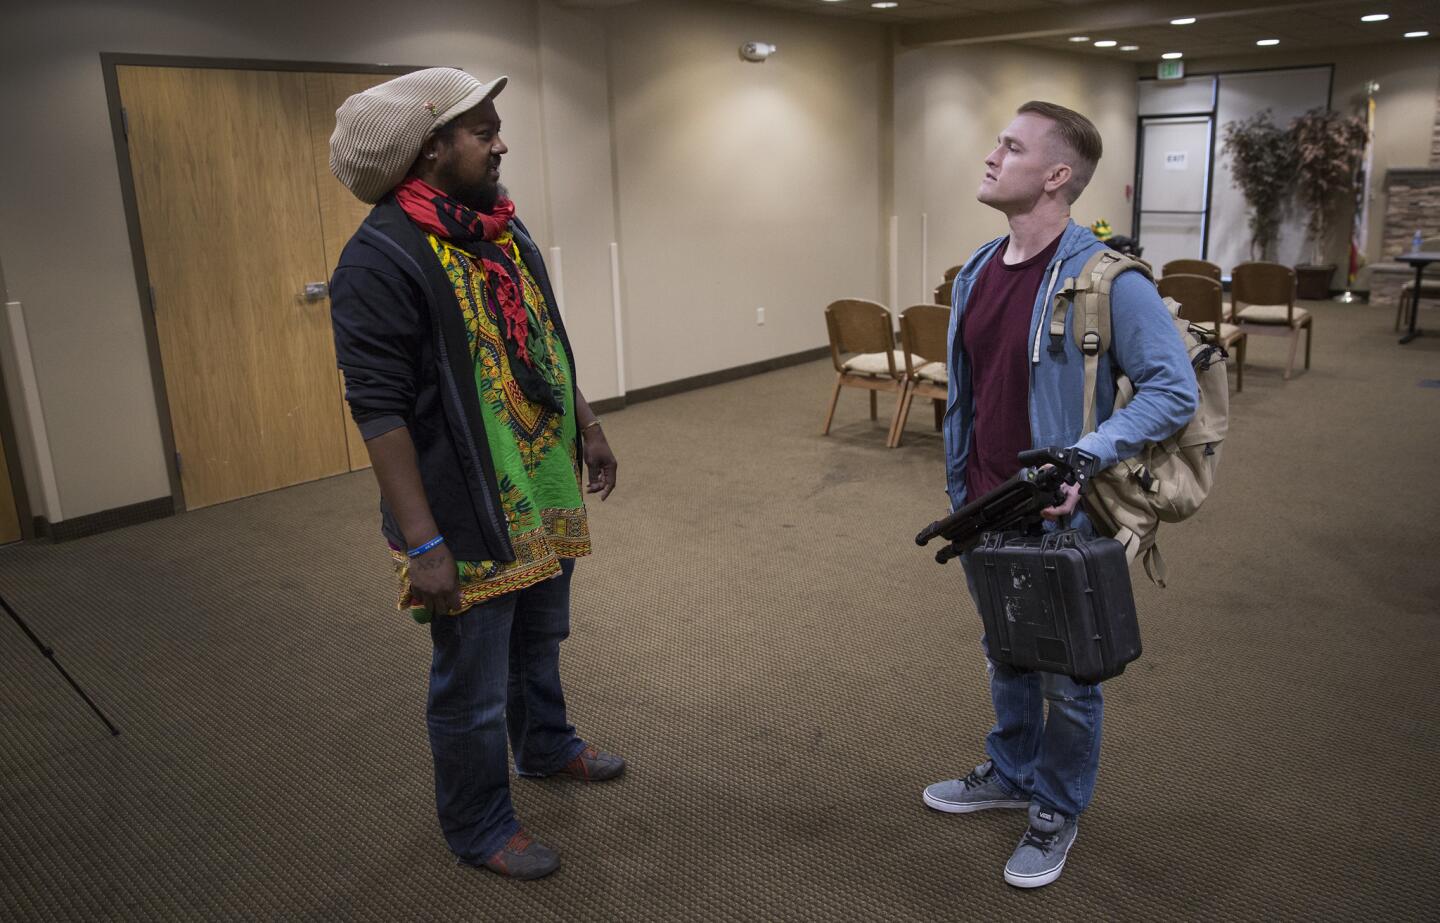 "Identity Evropa" founder and Cal State Stanislaus student Nathan Damigo, right, and Fela Uhuru chat as they prepare for students to attend a talk with Uhuru's Intro to Ethnic Studies class.